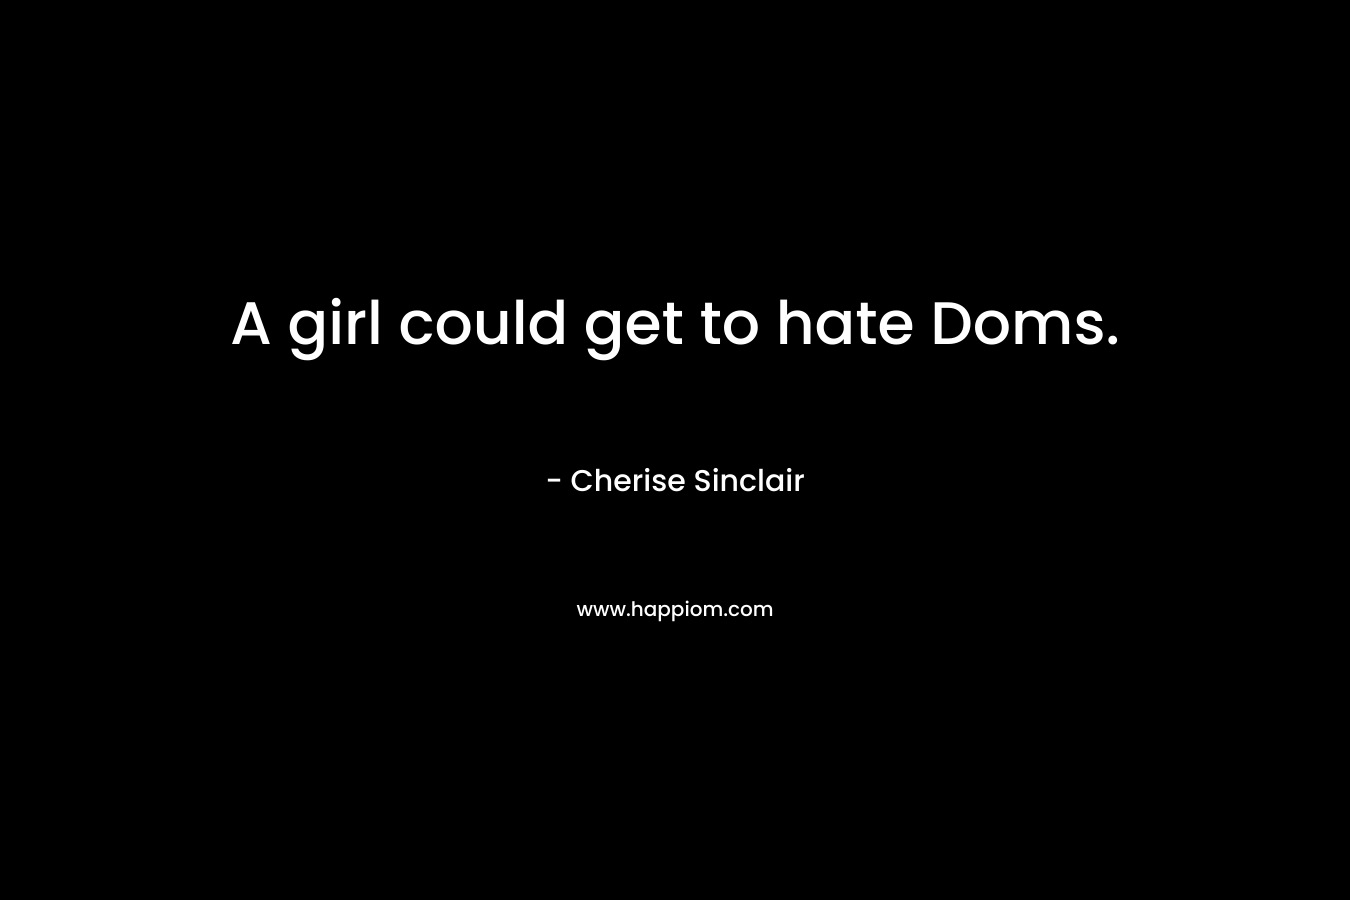 A girl could get to hate Doms.